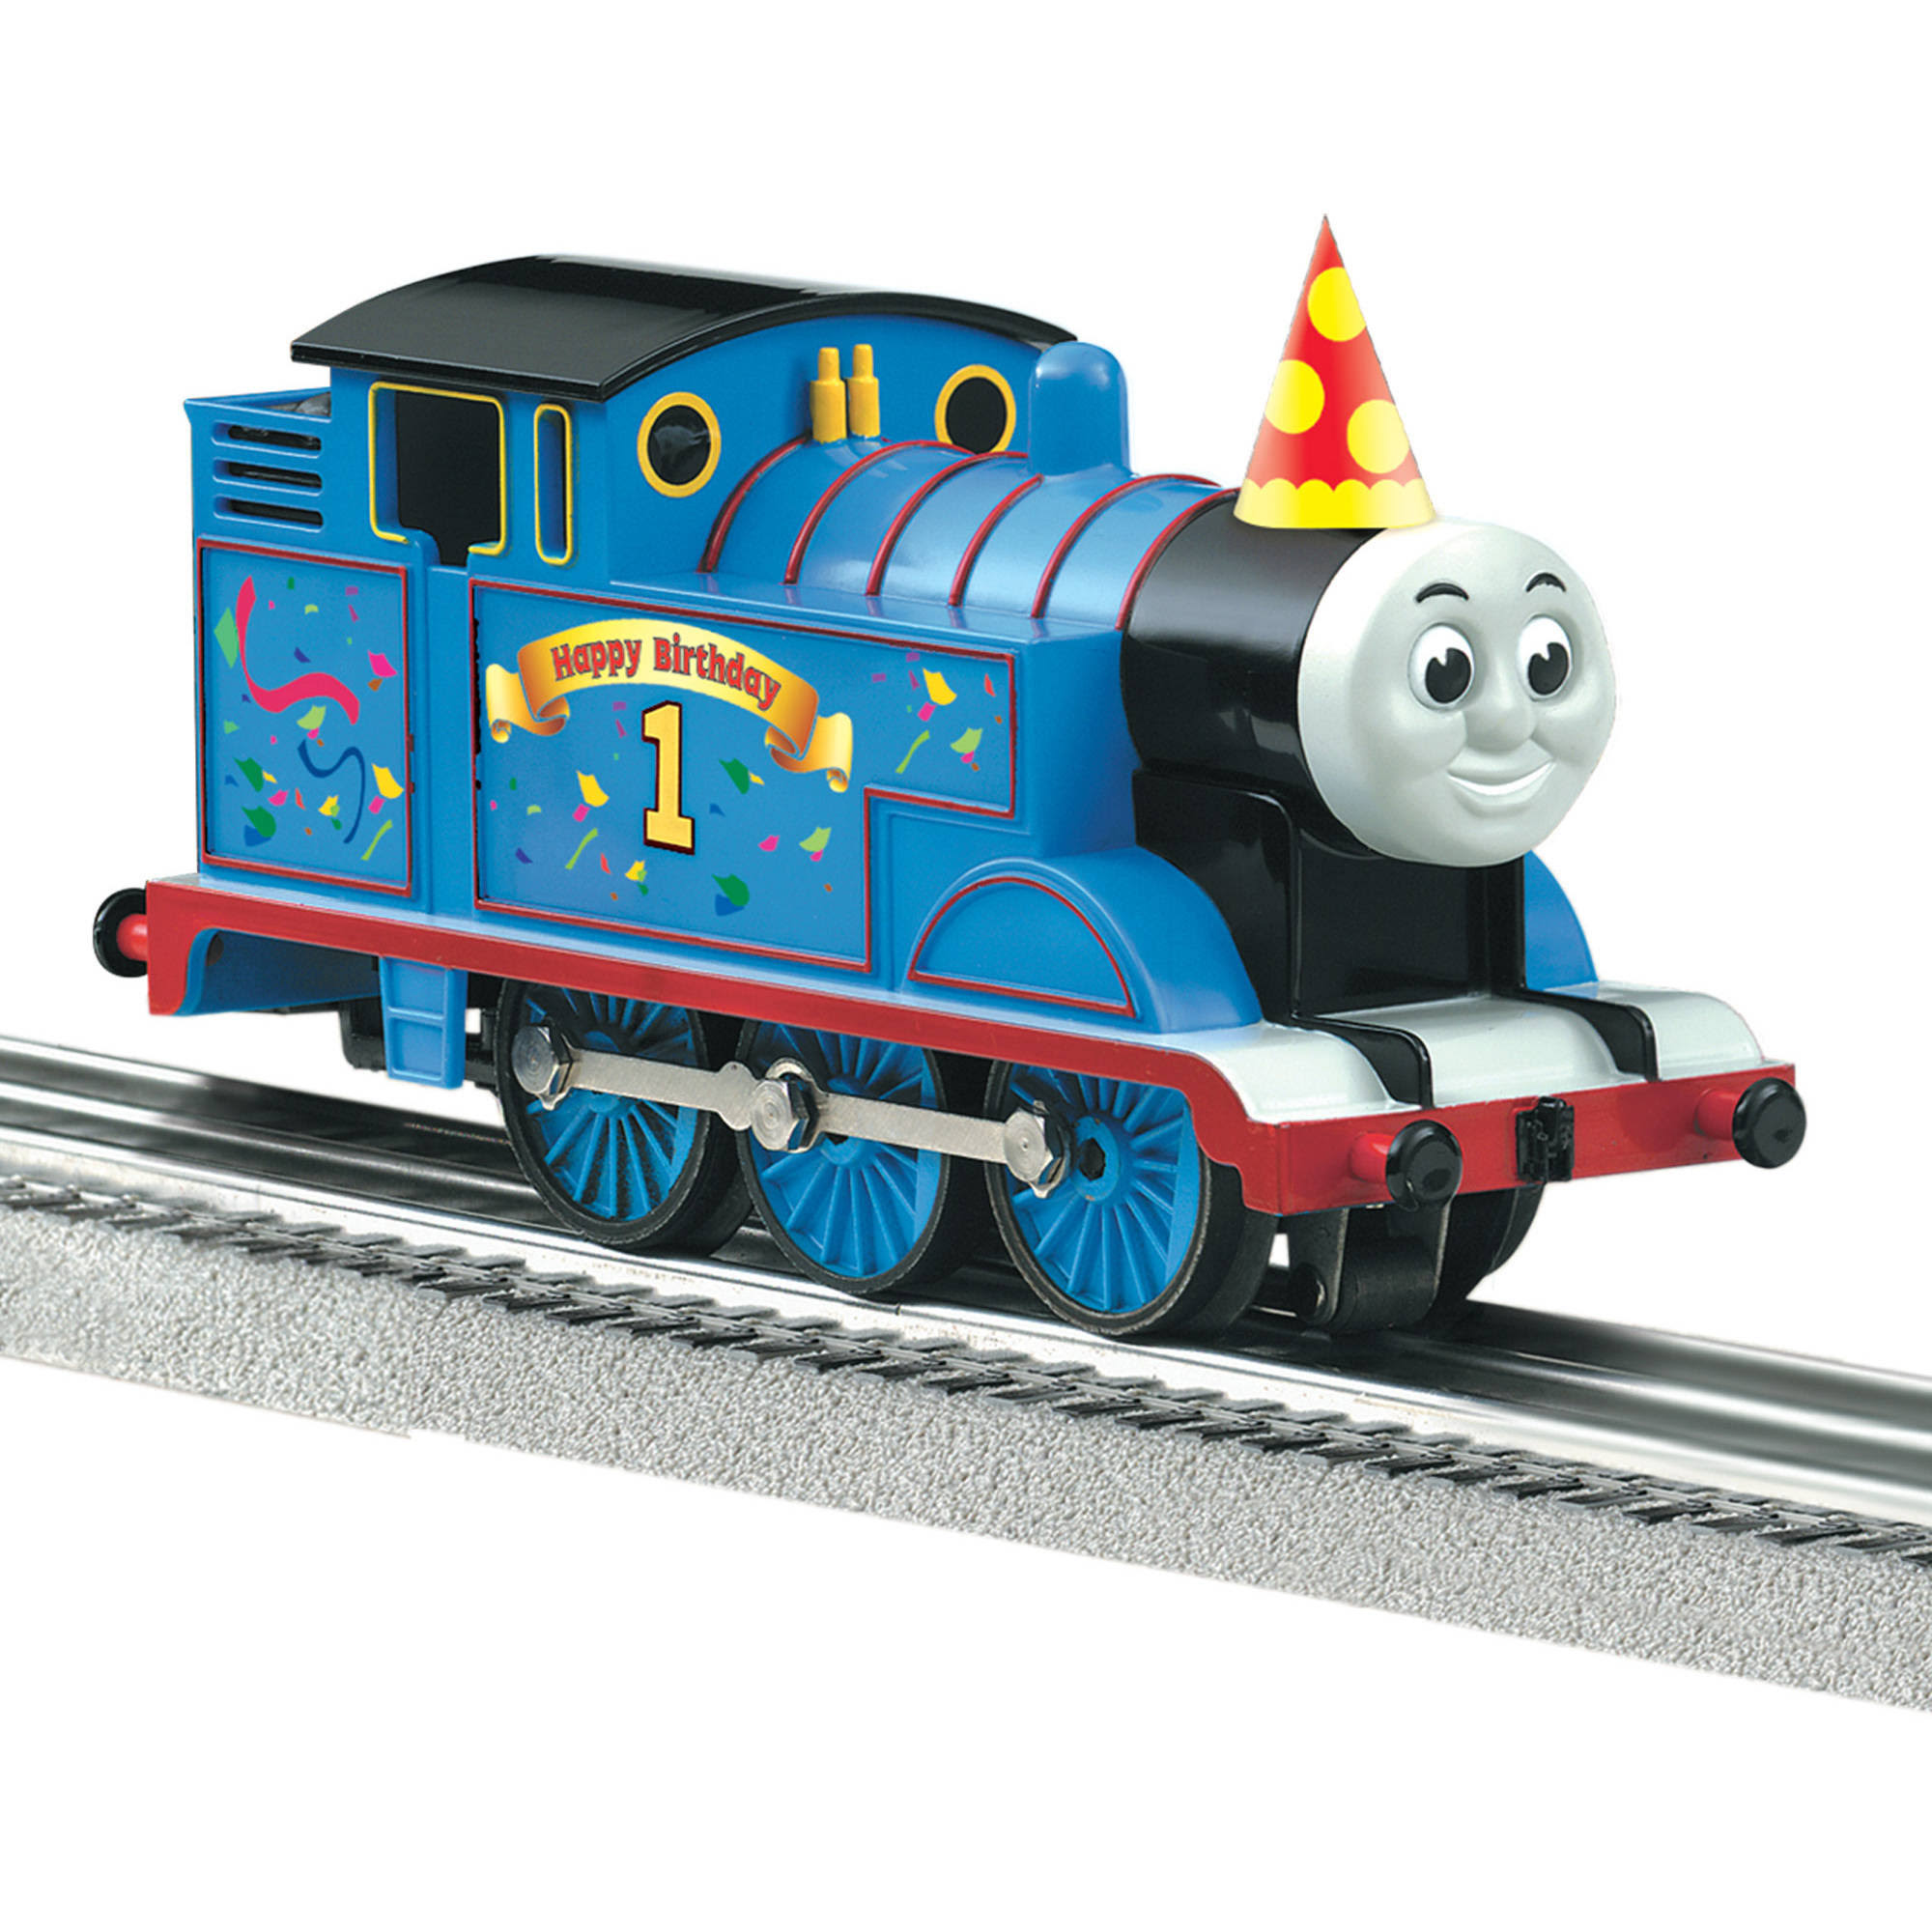 Lionel Birthday Thomas The Tank Engine Train With LionChief Remote | Lionel | Hobbies | 30 Day Money Back Guarantee | Best Price Guarantee